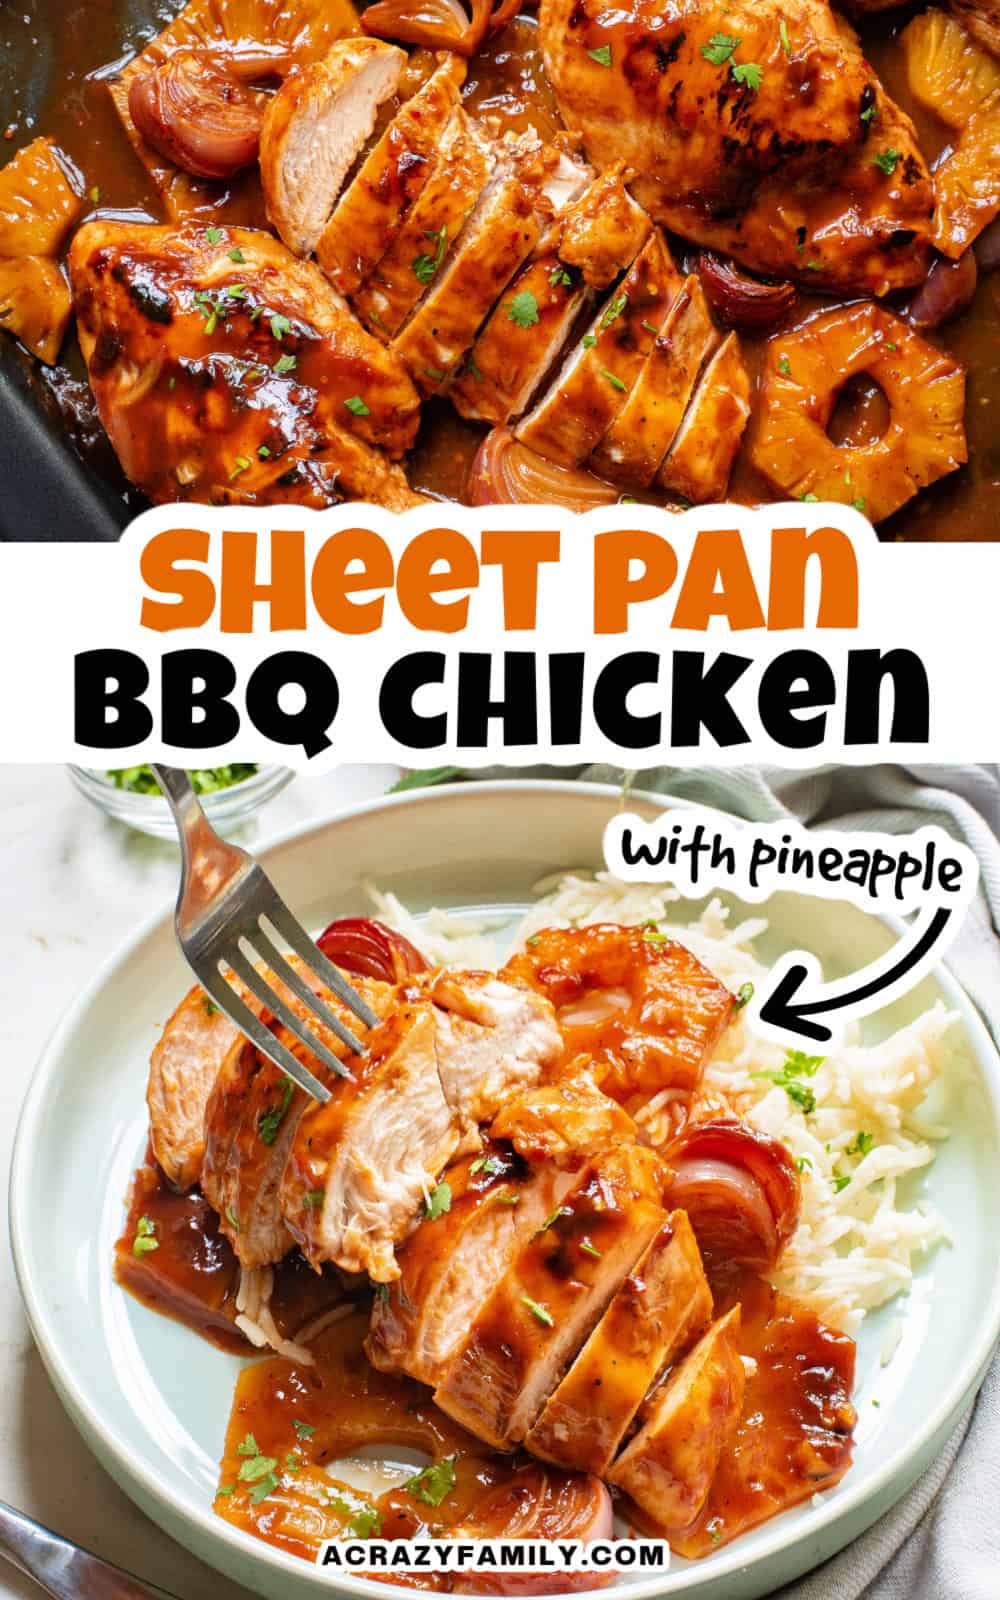 Sheet Pan BBQ Chicken with Pineapple pin